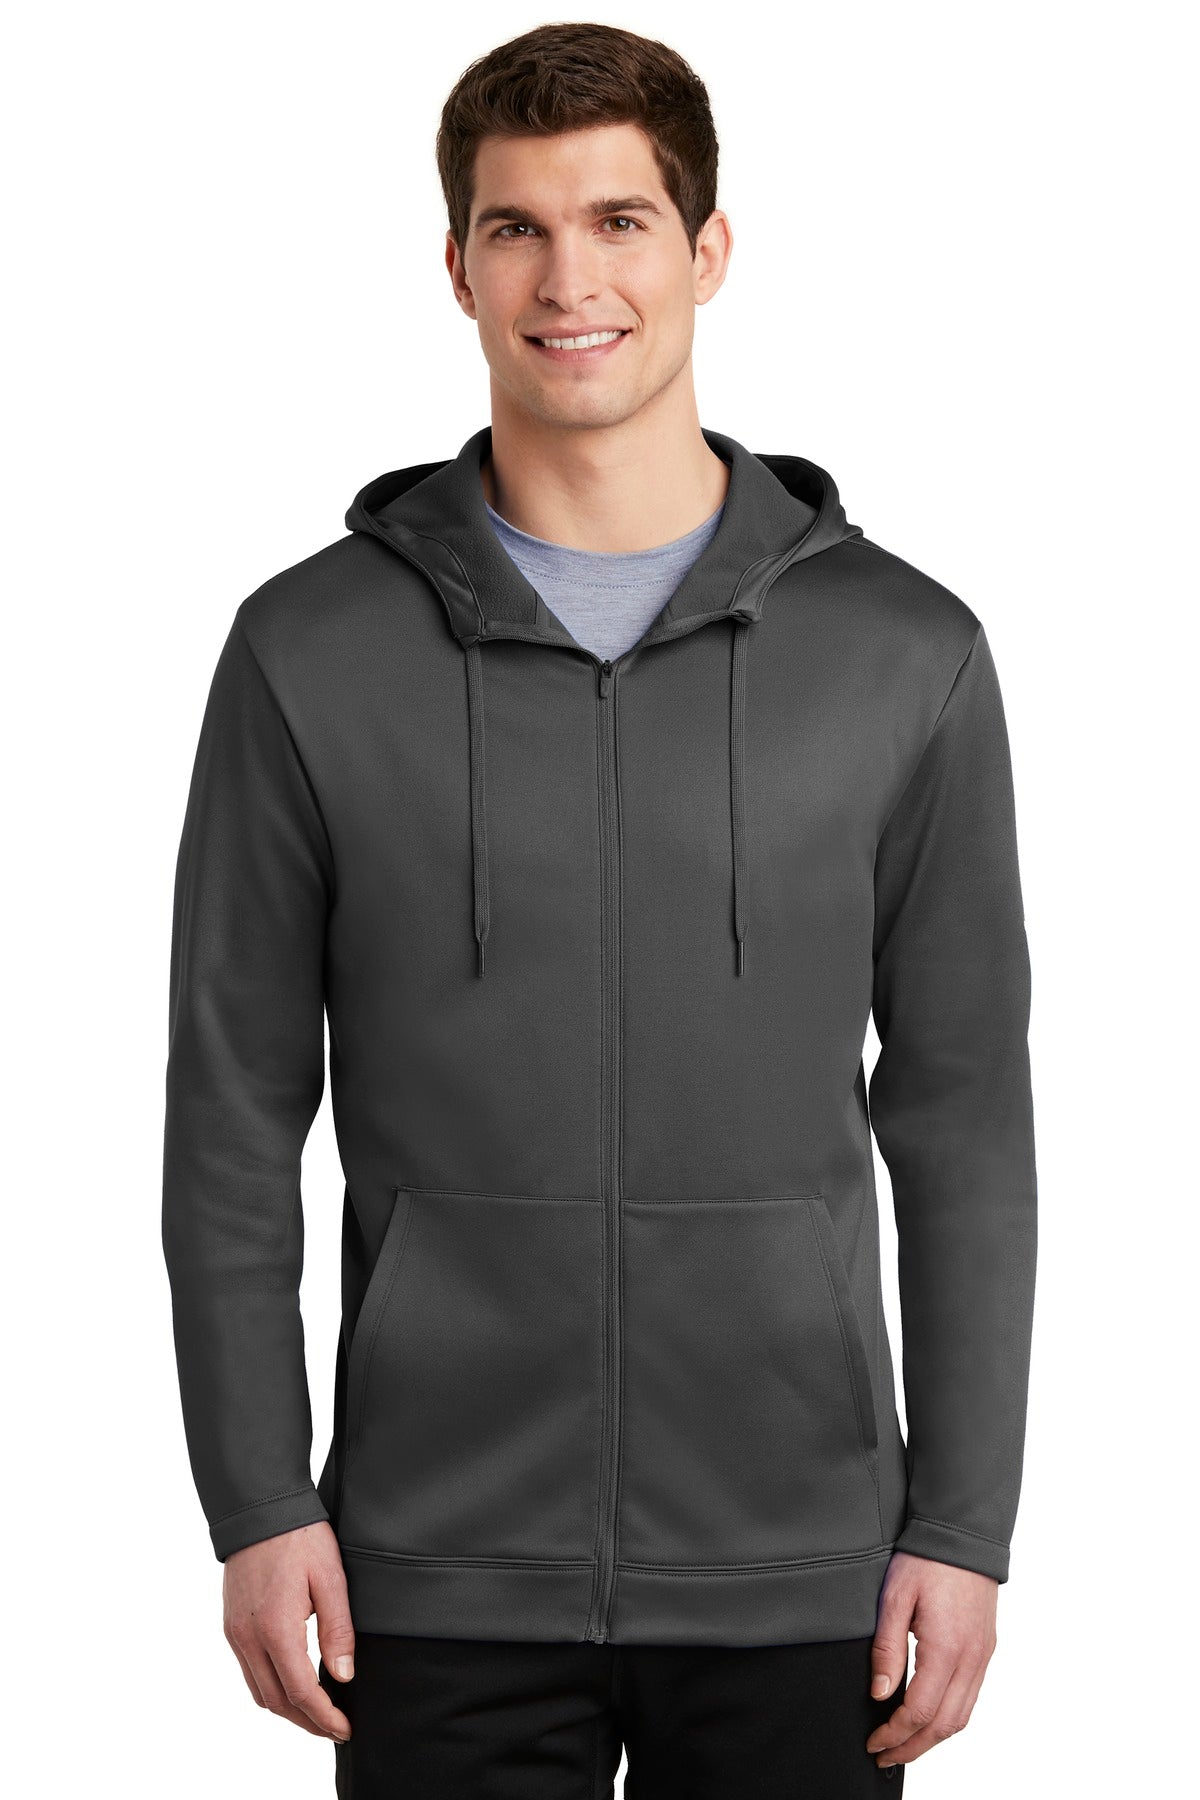 NKAH6259-Anthracite-XS